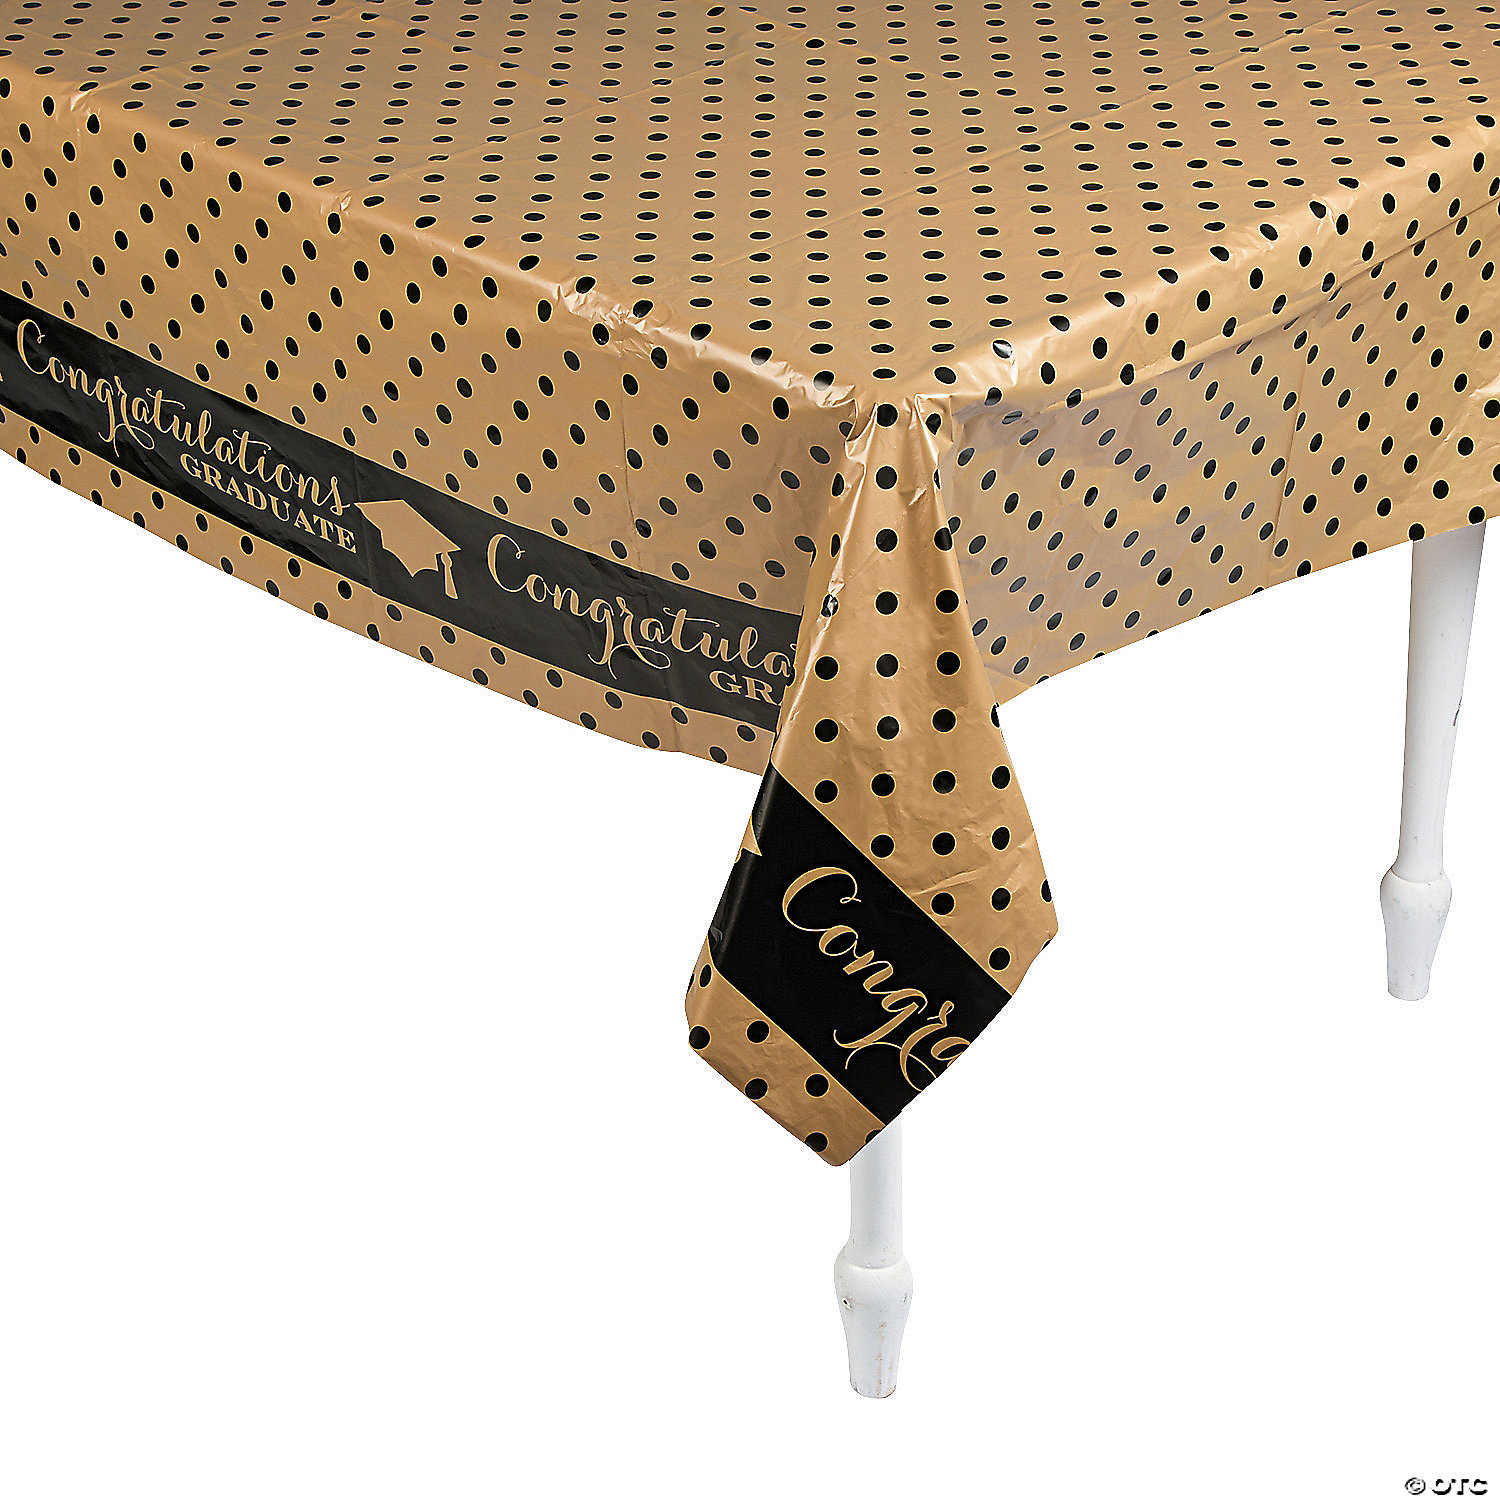 Amscan 571896 Tablecover Black and Gold for sale online 